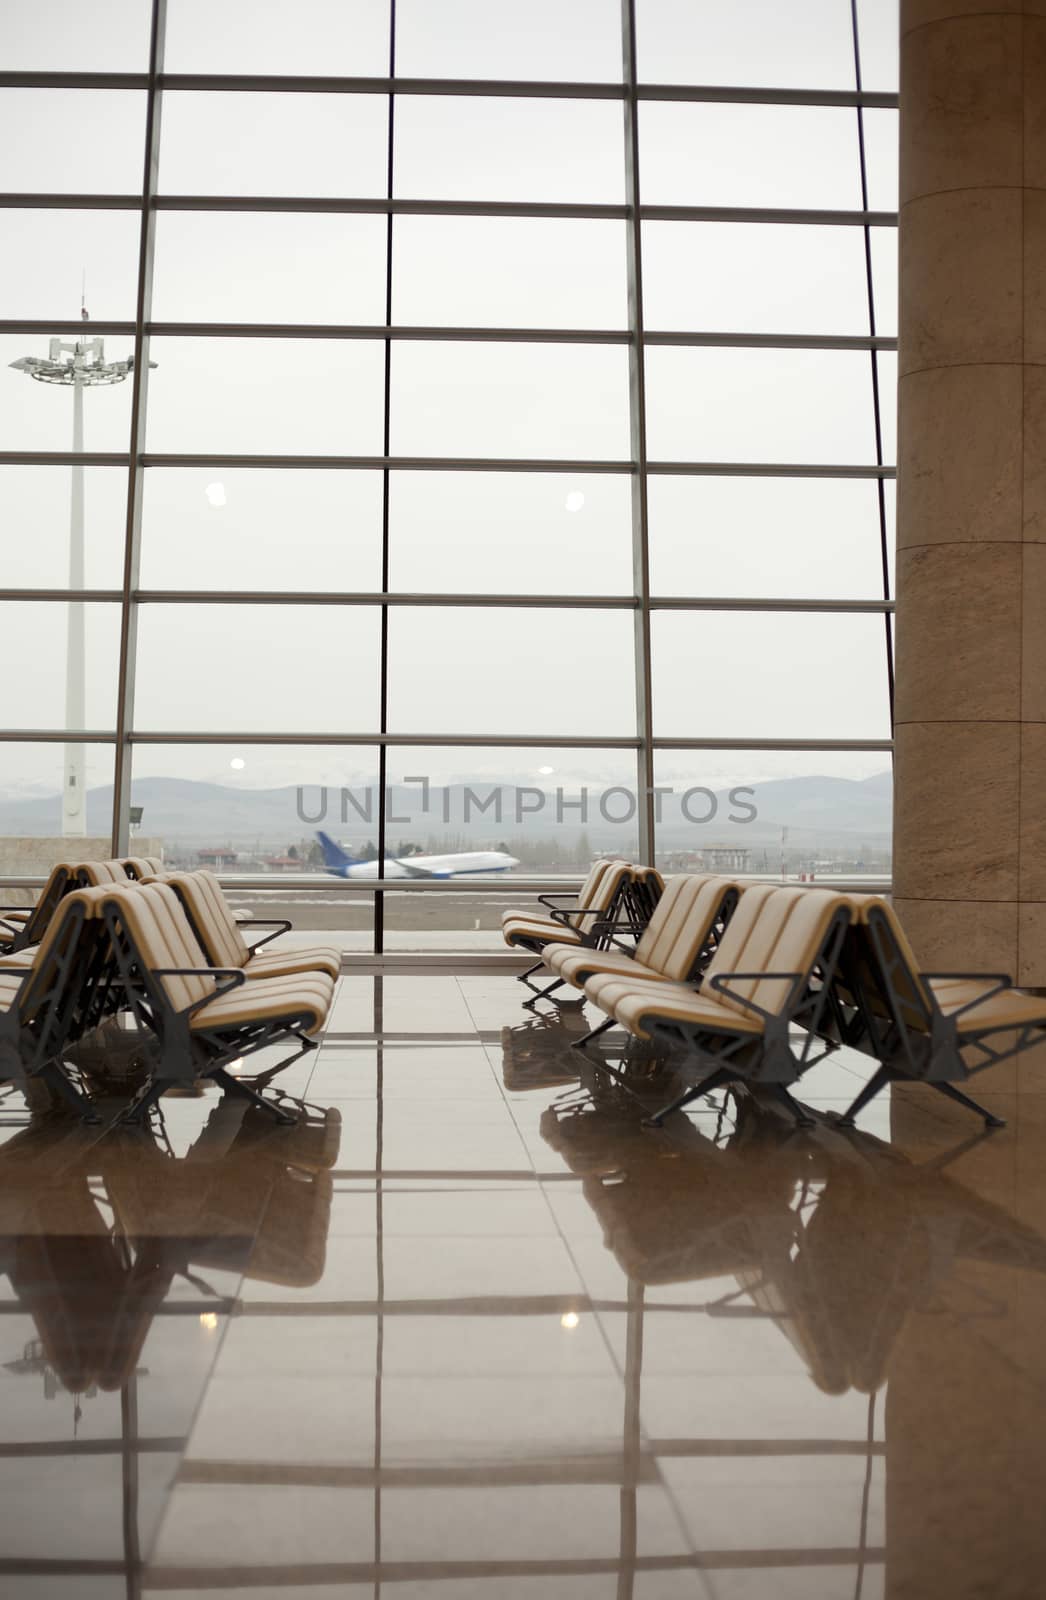 waiting room with seats in airport  by senkaya